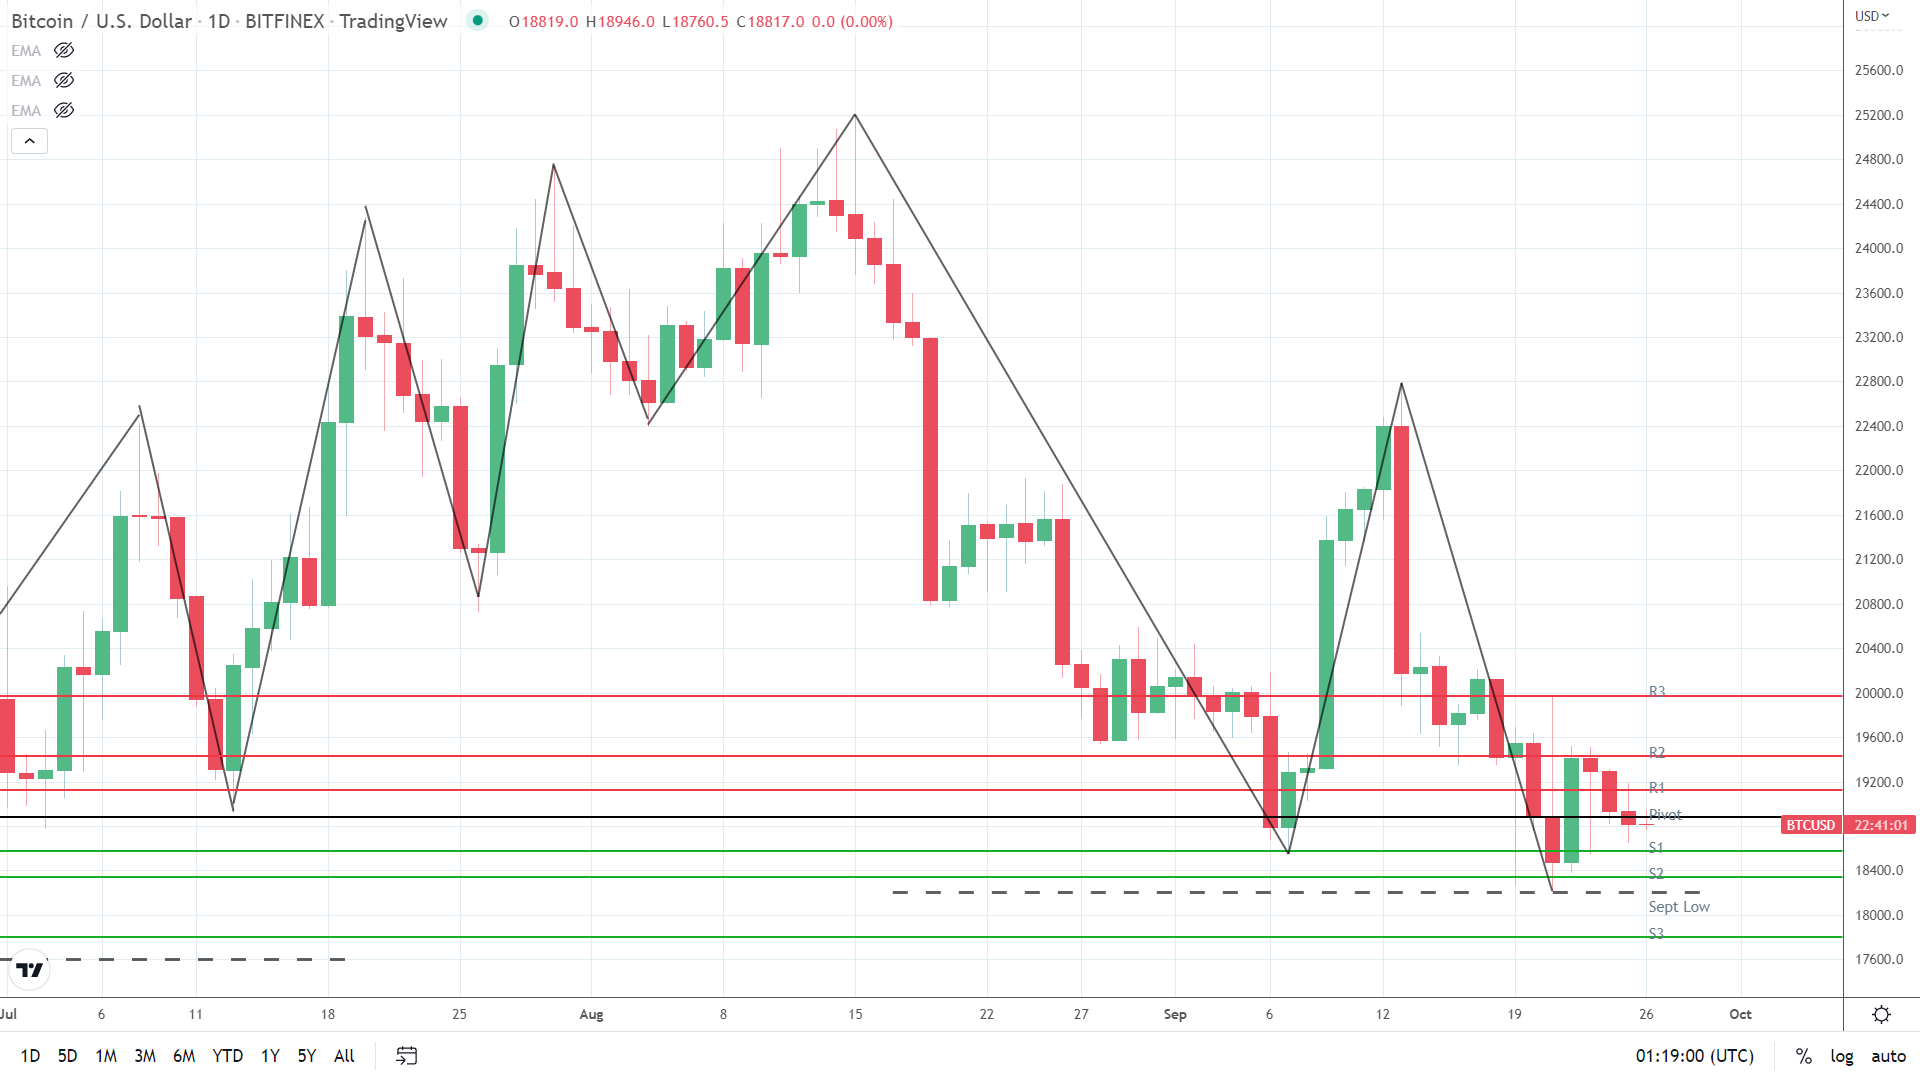 BTC sees a range-bound start to the week